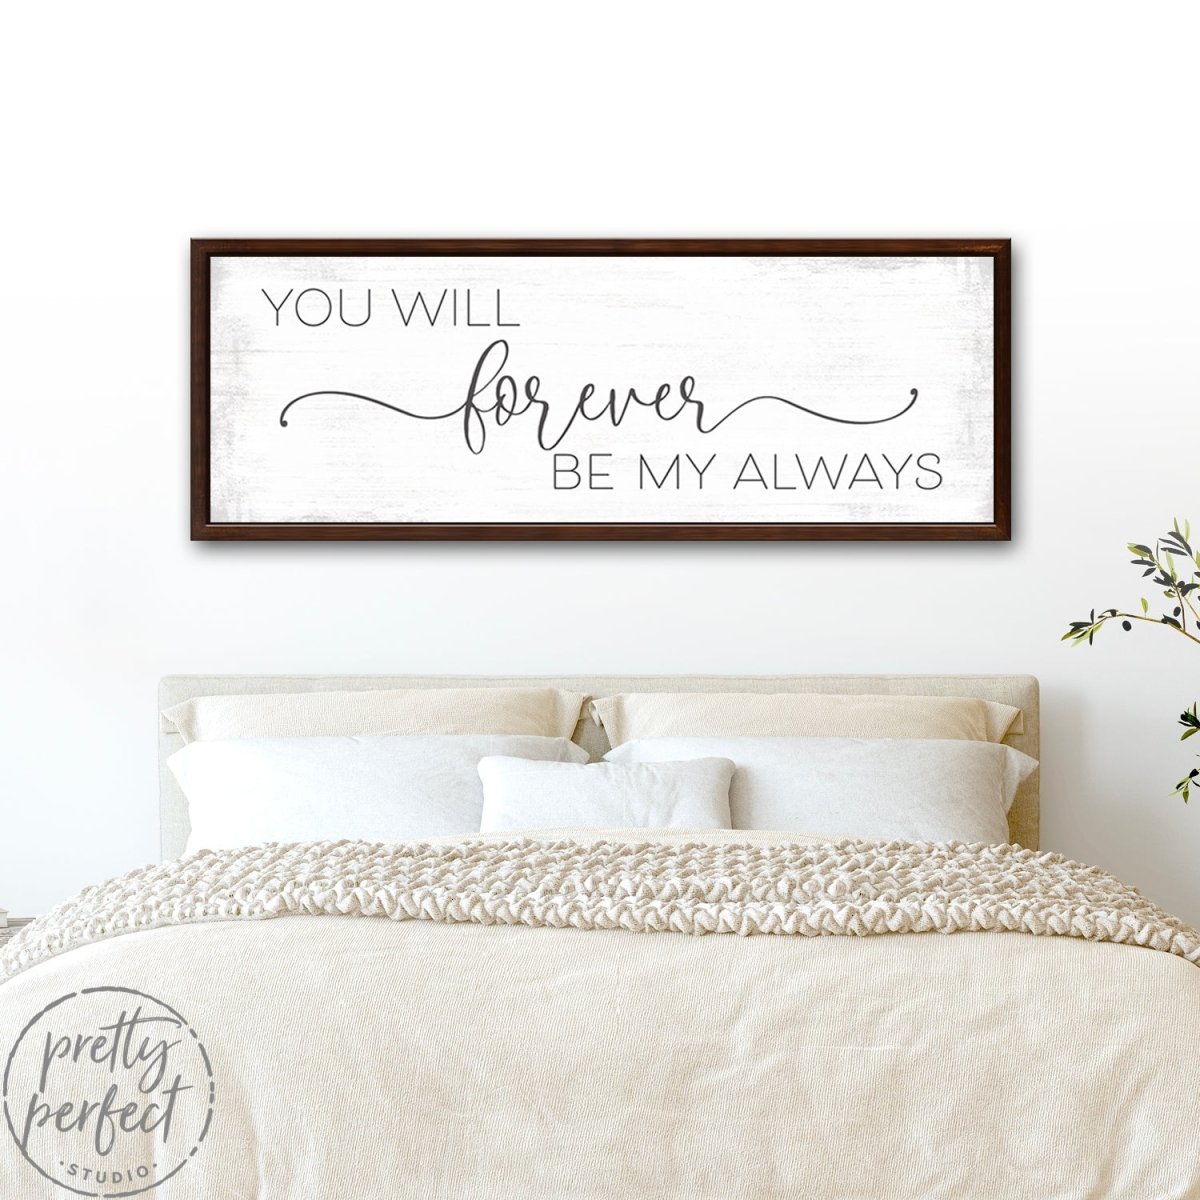 You Will Forever Be My Always Sign Over Bed - Pretty Perfect Studio 